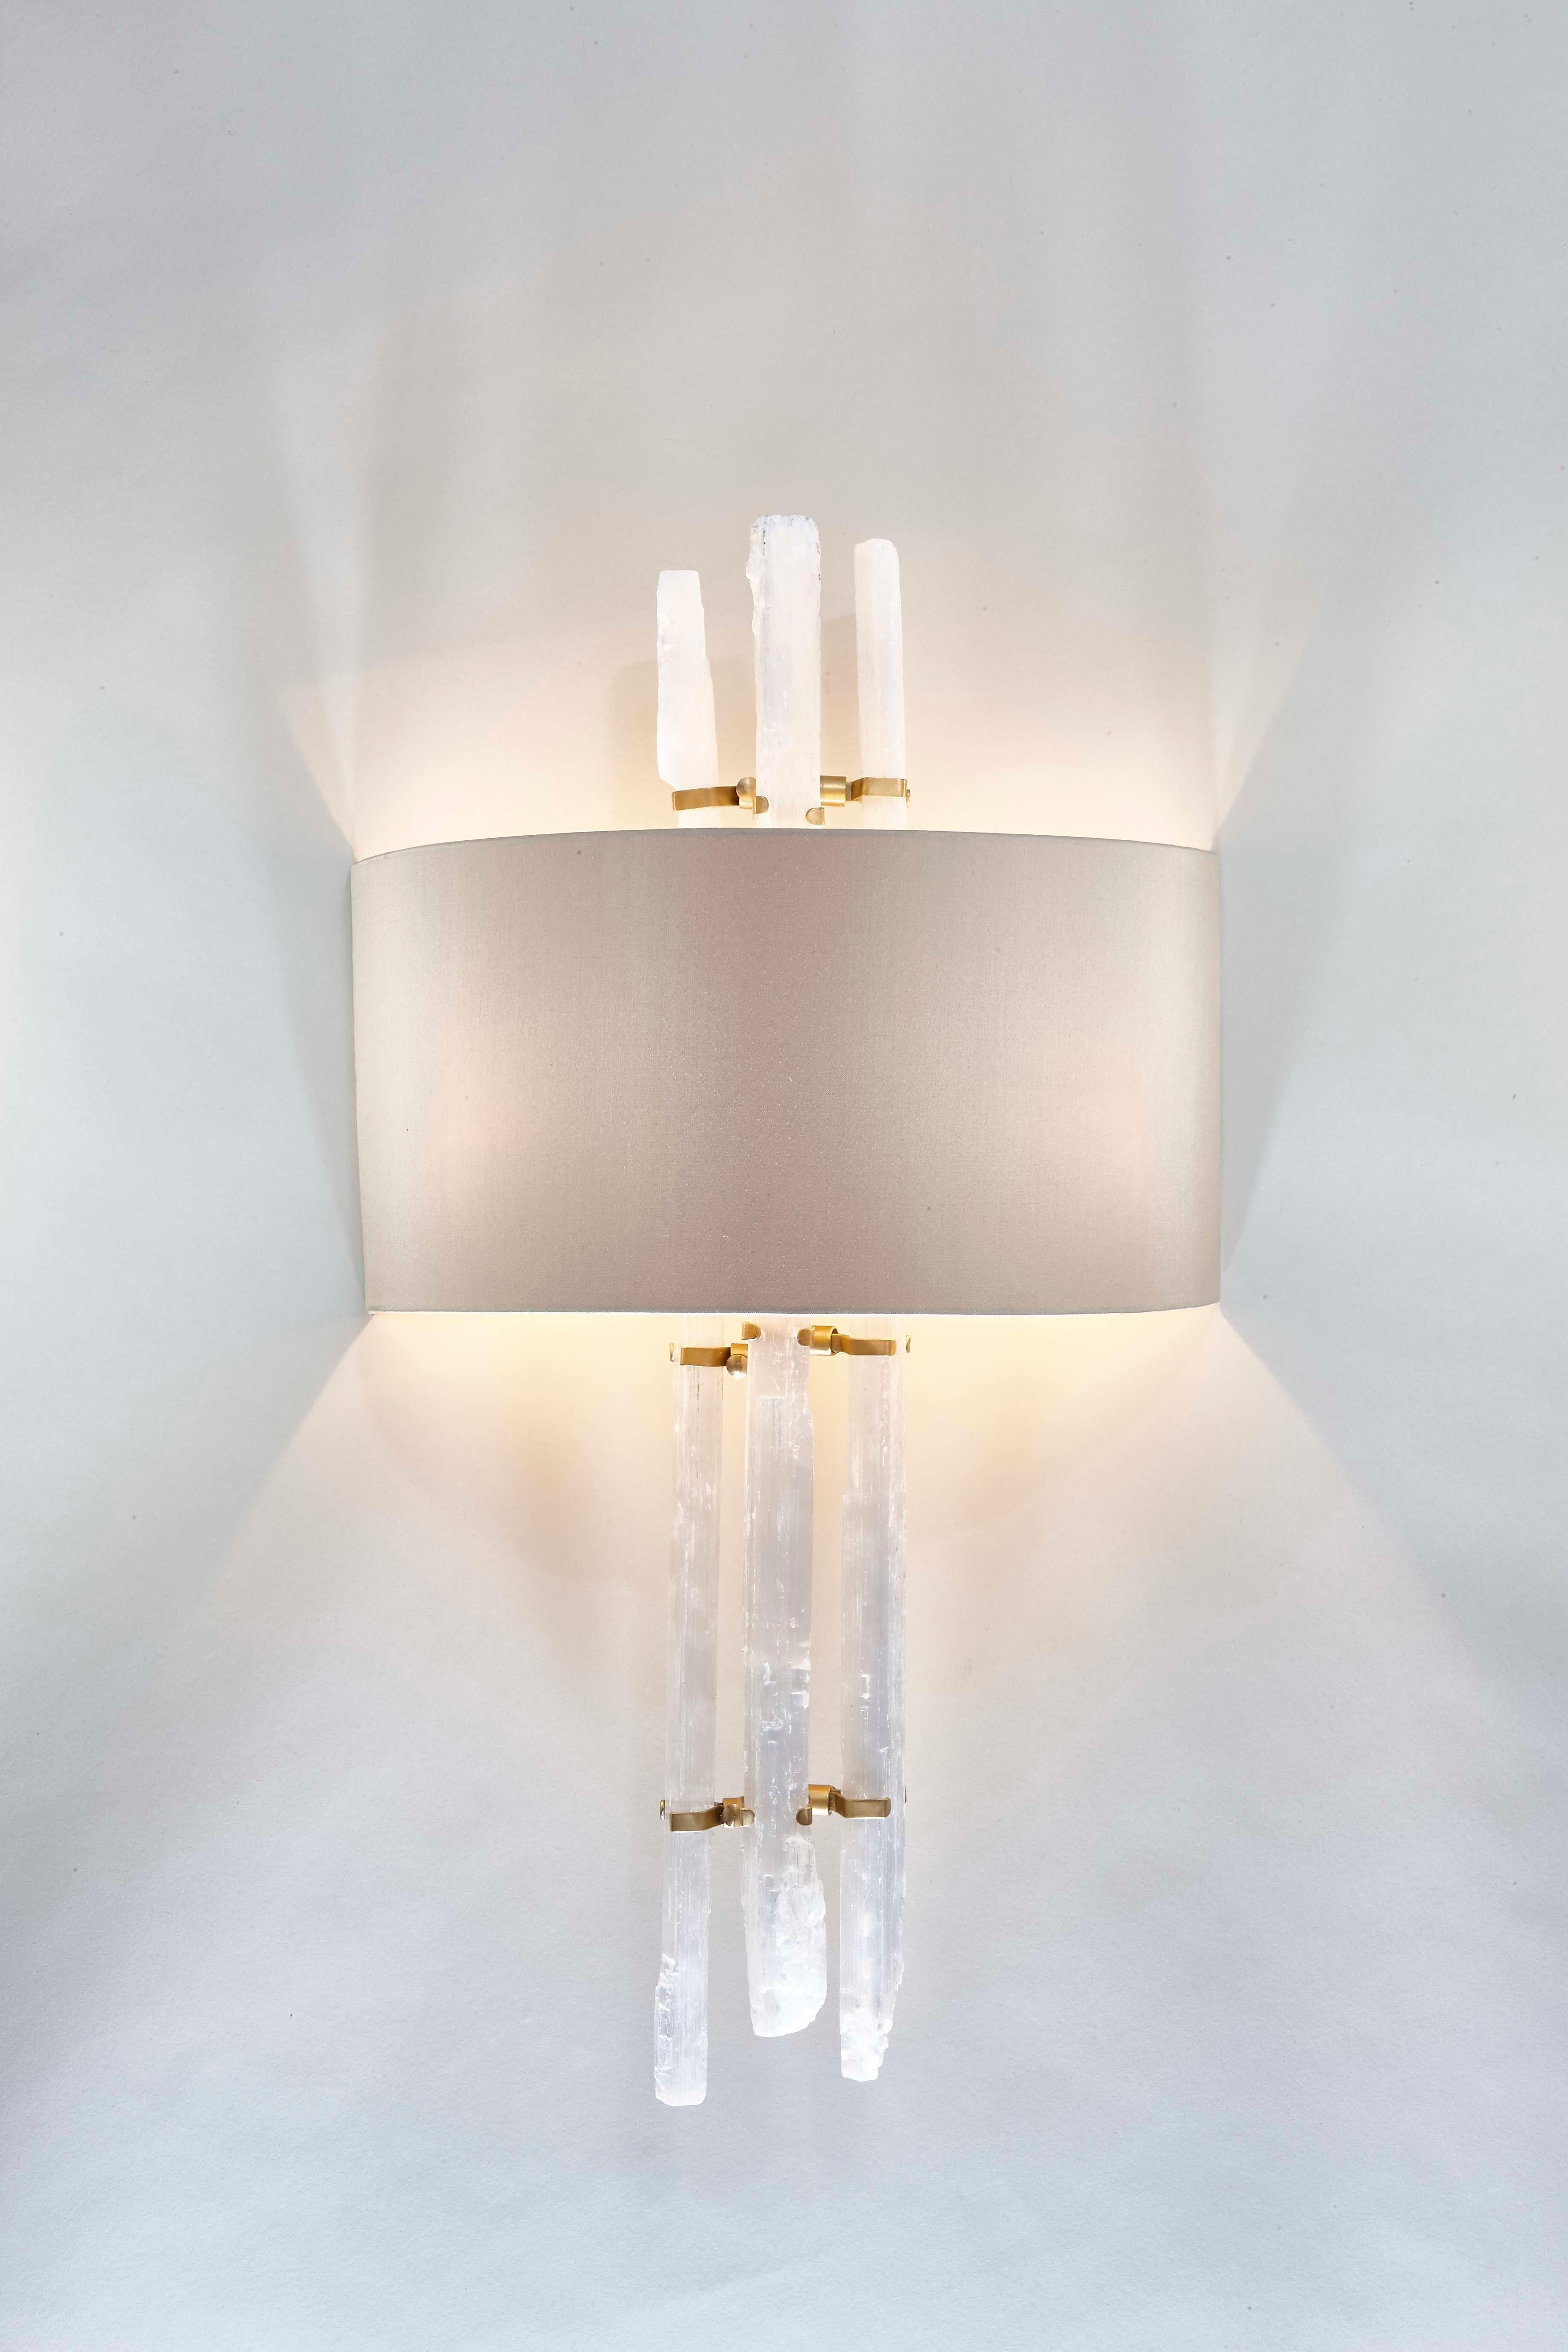 This delicately handcrafted wall light is one of our favourite additions to any interior. Not only is it a beautiful piece of art on the wall, but it also adds a soft extra layer of lower lighting. The bespoke half-shade surrounds long organic rock